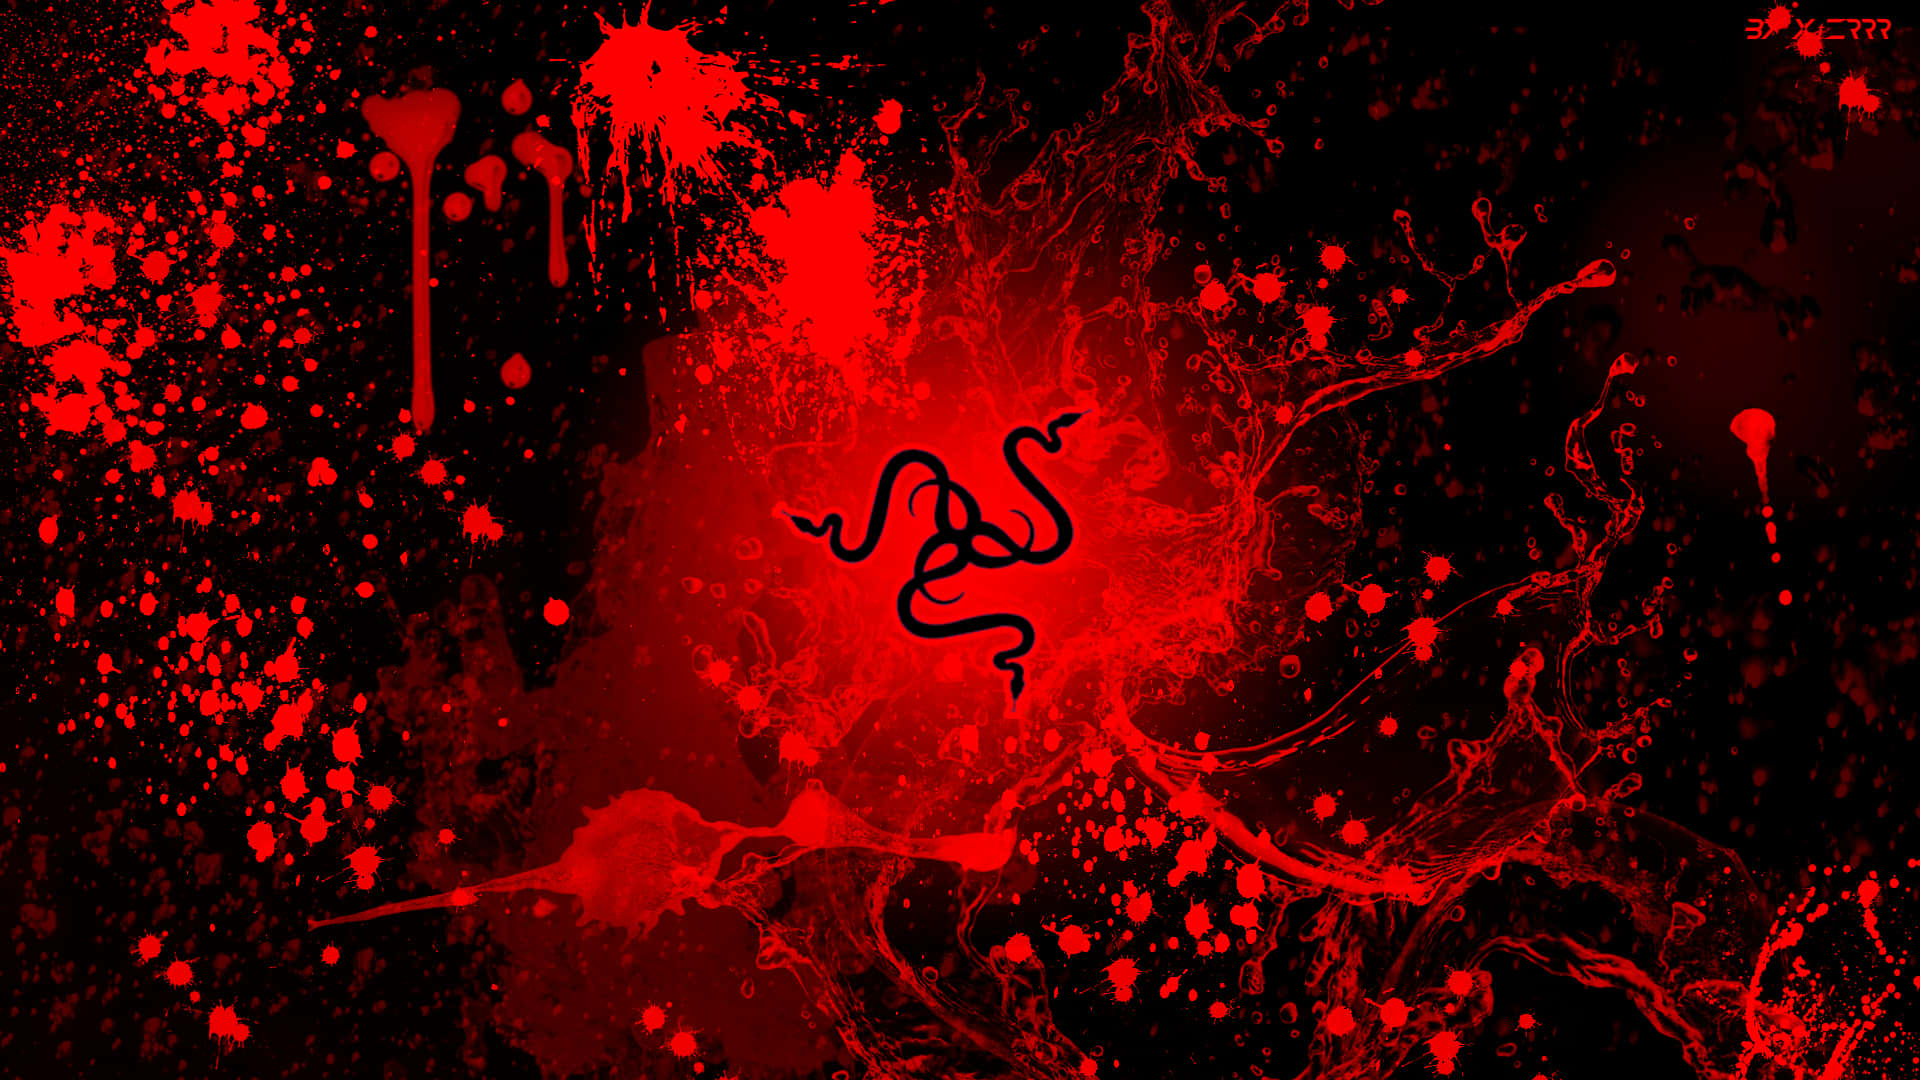 A Red And Black Background With A Red Splatter